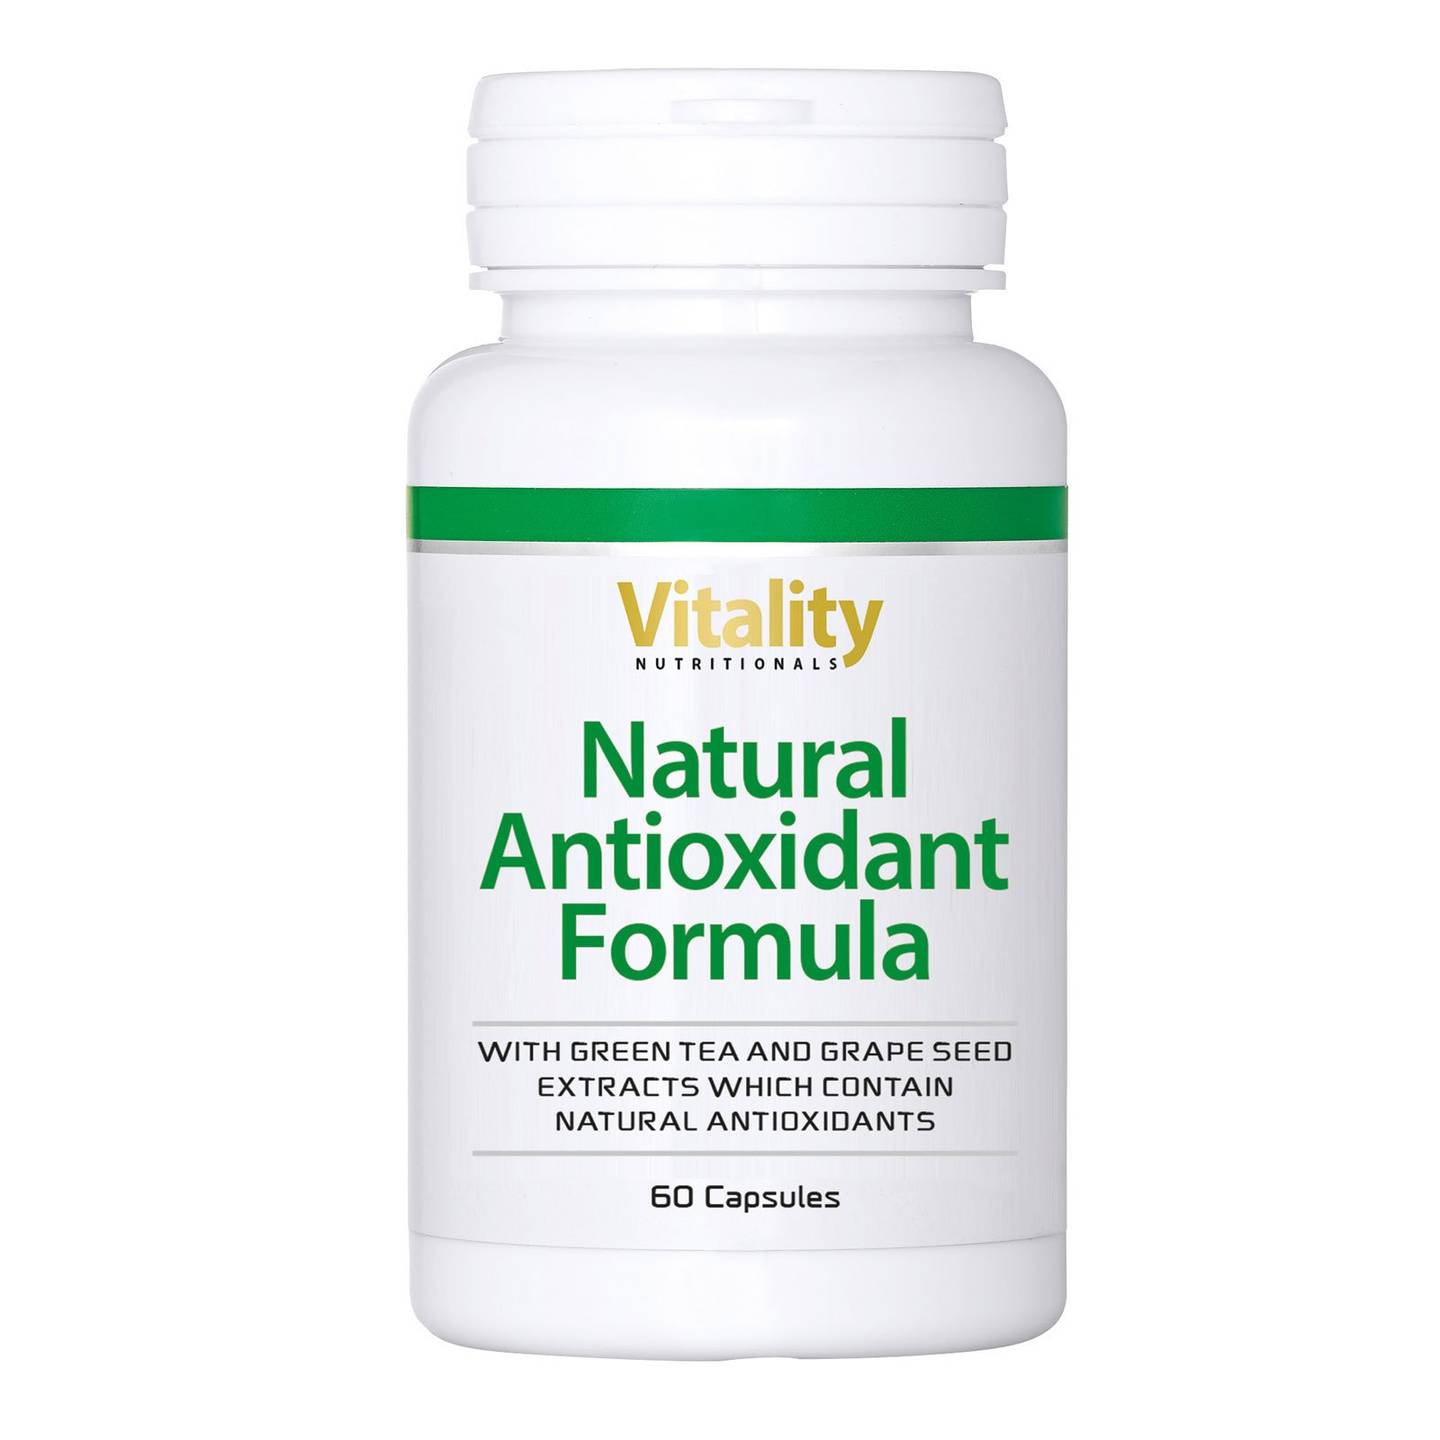 Antioxidant supplements for overall vitality